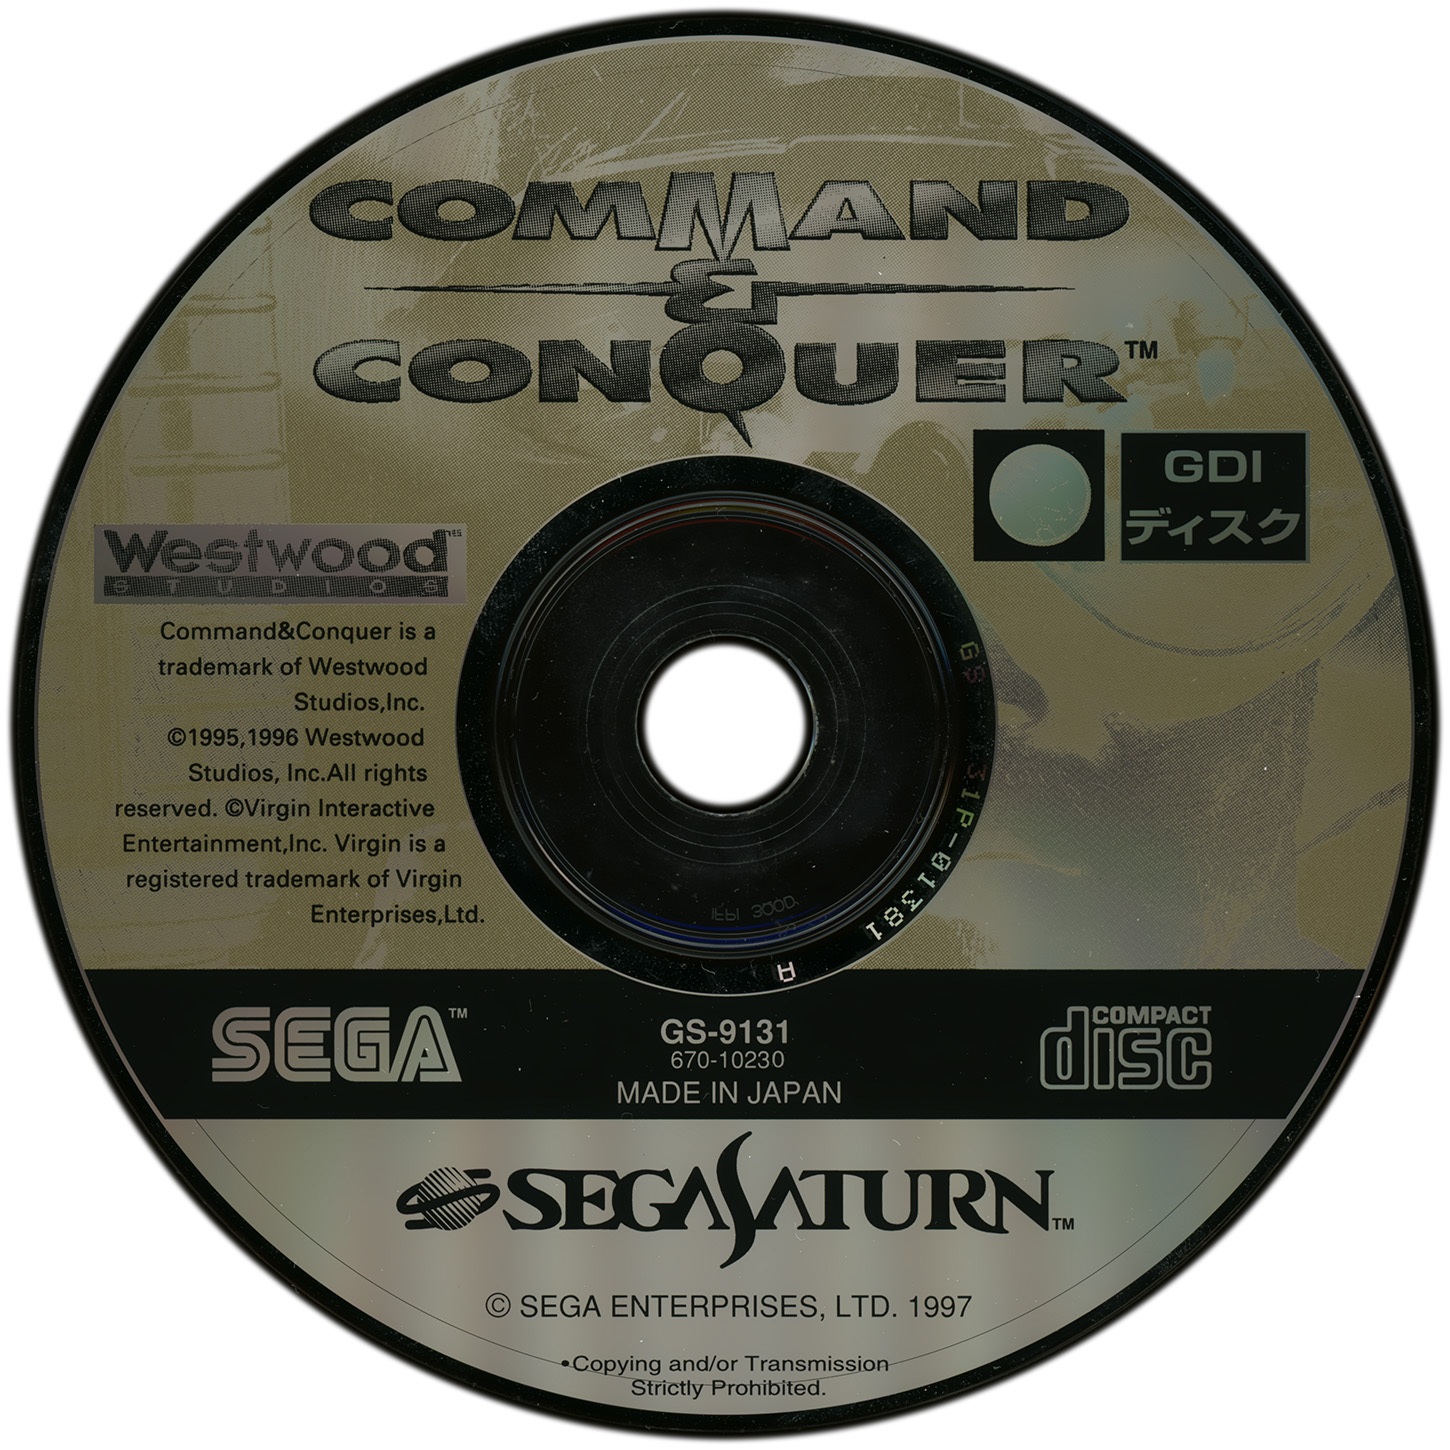 windows 3.x space conquer game floppy disc install